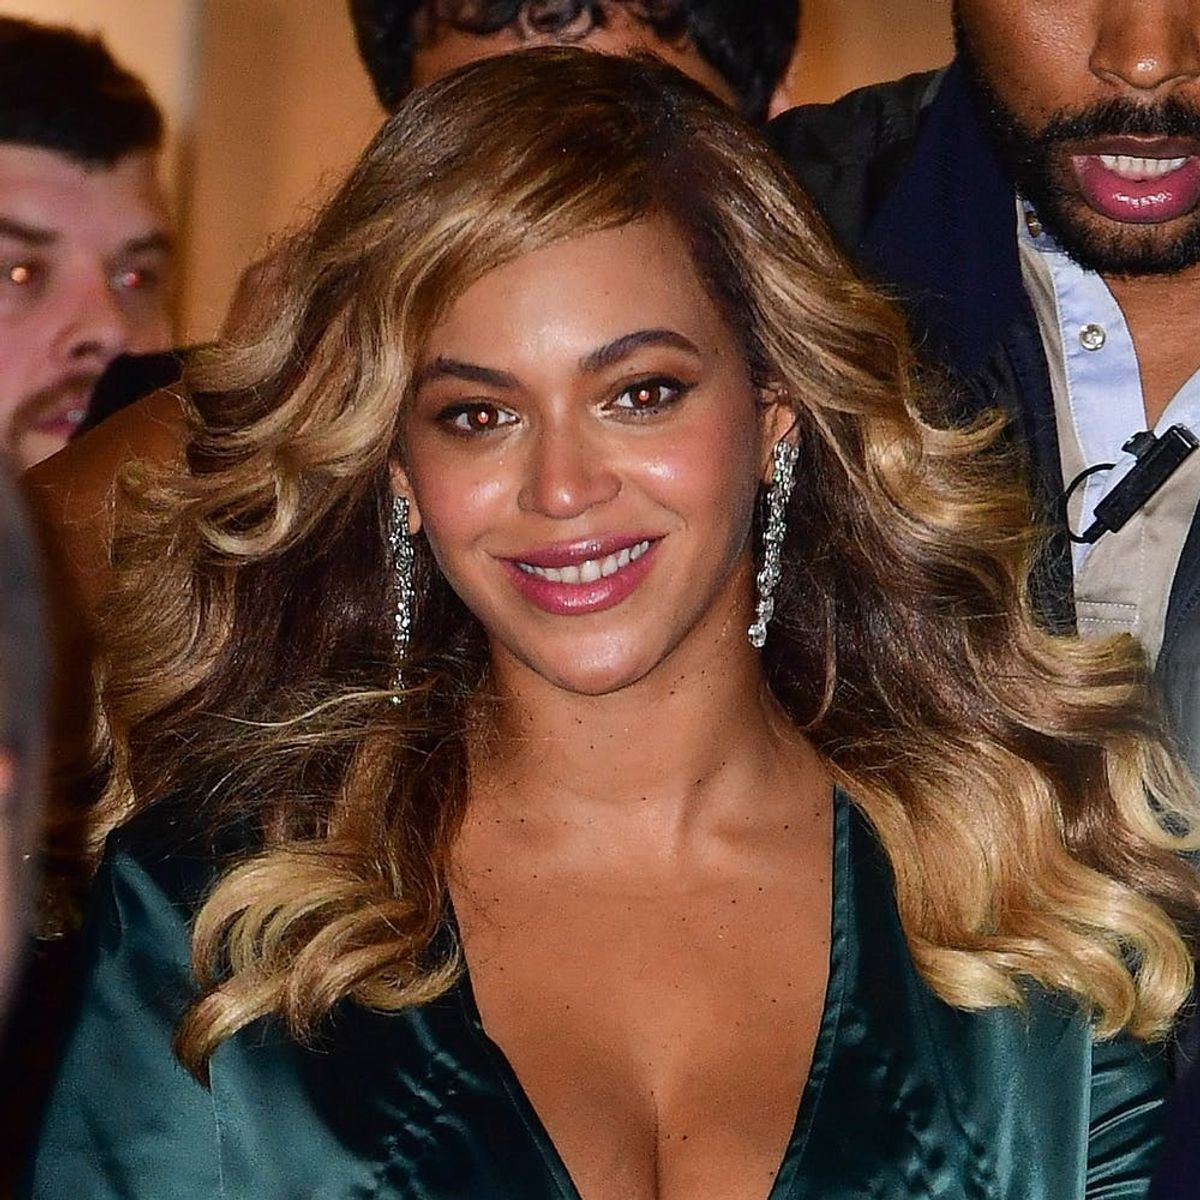 Fans Are Speculating Beyoncé’s New Tattoo Is a Tribute to Her Kids